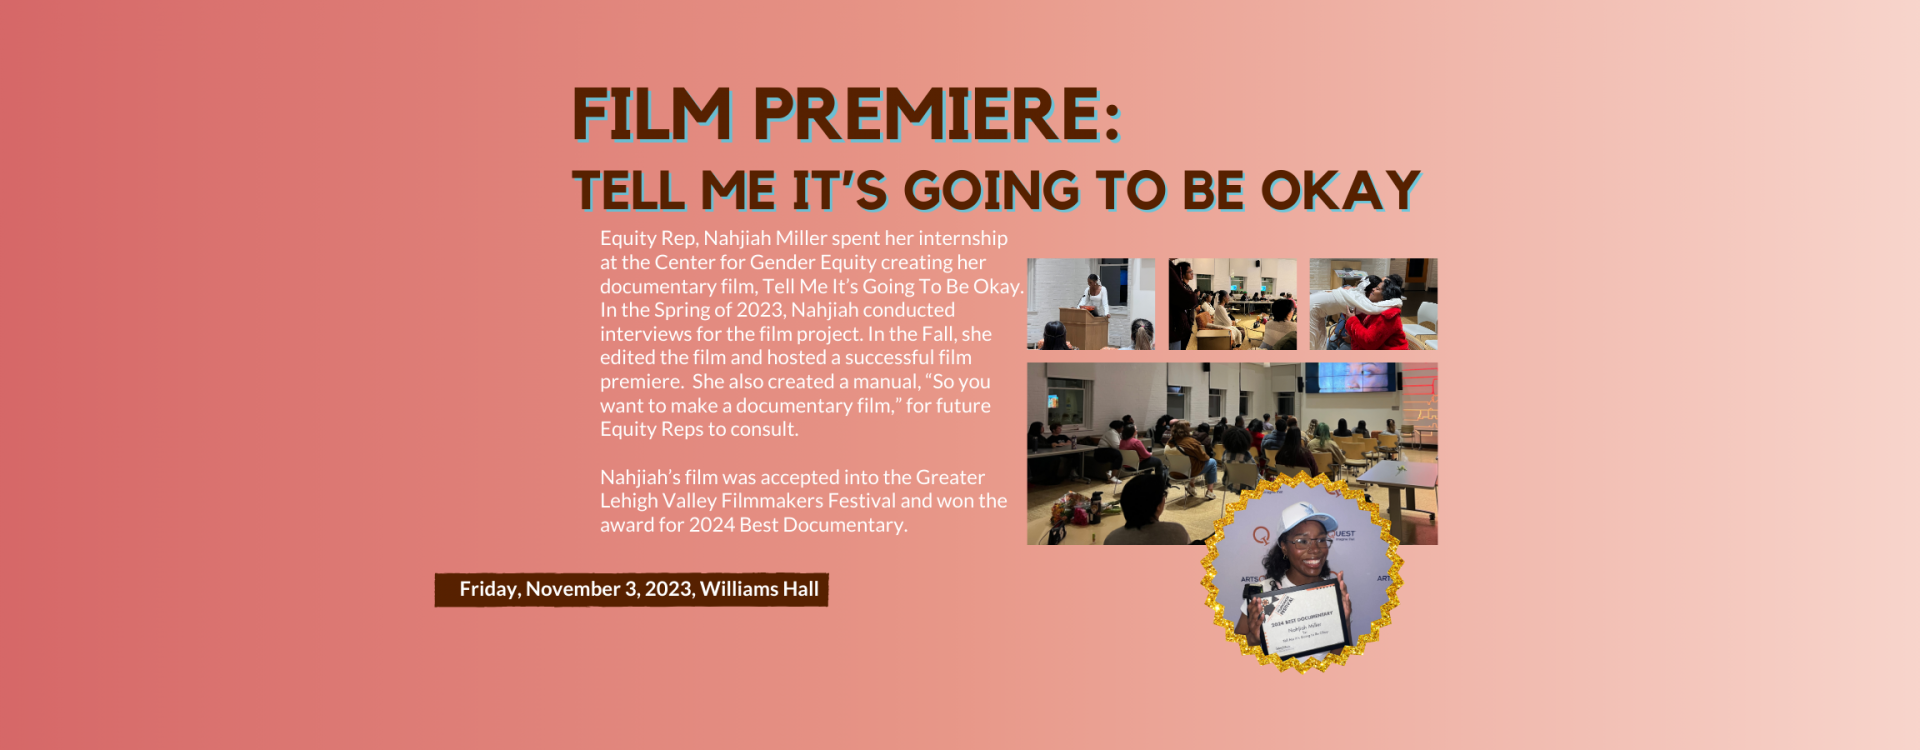 Equity Rep, Nahjiah Miller spent her internship at the Center for Gender Equity creating her documentary film, Tell Me It’s Going To Be Okay. In the Spring of 2023, Nahjiah conducted interviews for the film project. In the Fall, she edited the film and hosted a successful film premiere.  She also created a manual, “So you want to make a documentary film,” for future Equity Reps to consult.  Nahjiah’s film was accepted into the Greater Lehigh Valley Filmmakers Festival and won the award for 2024 Best Documen